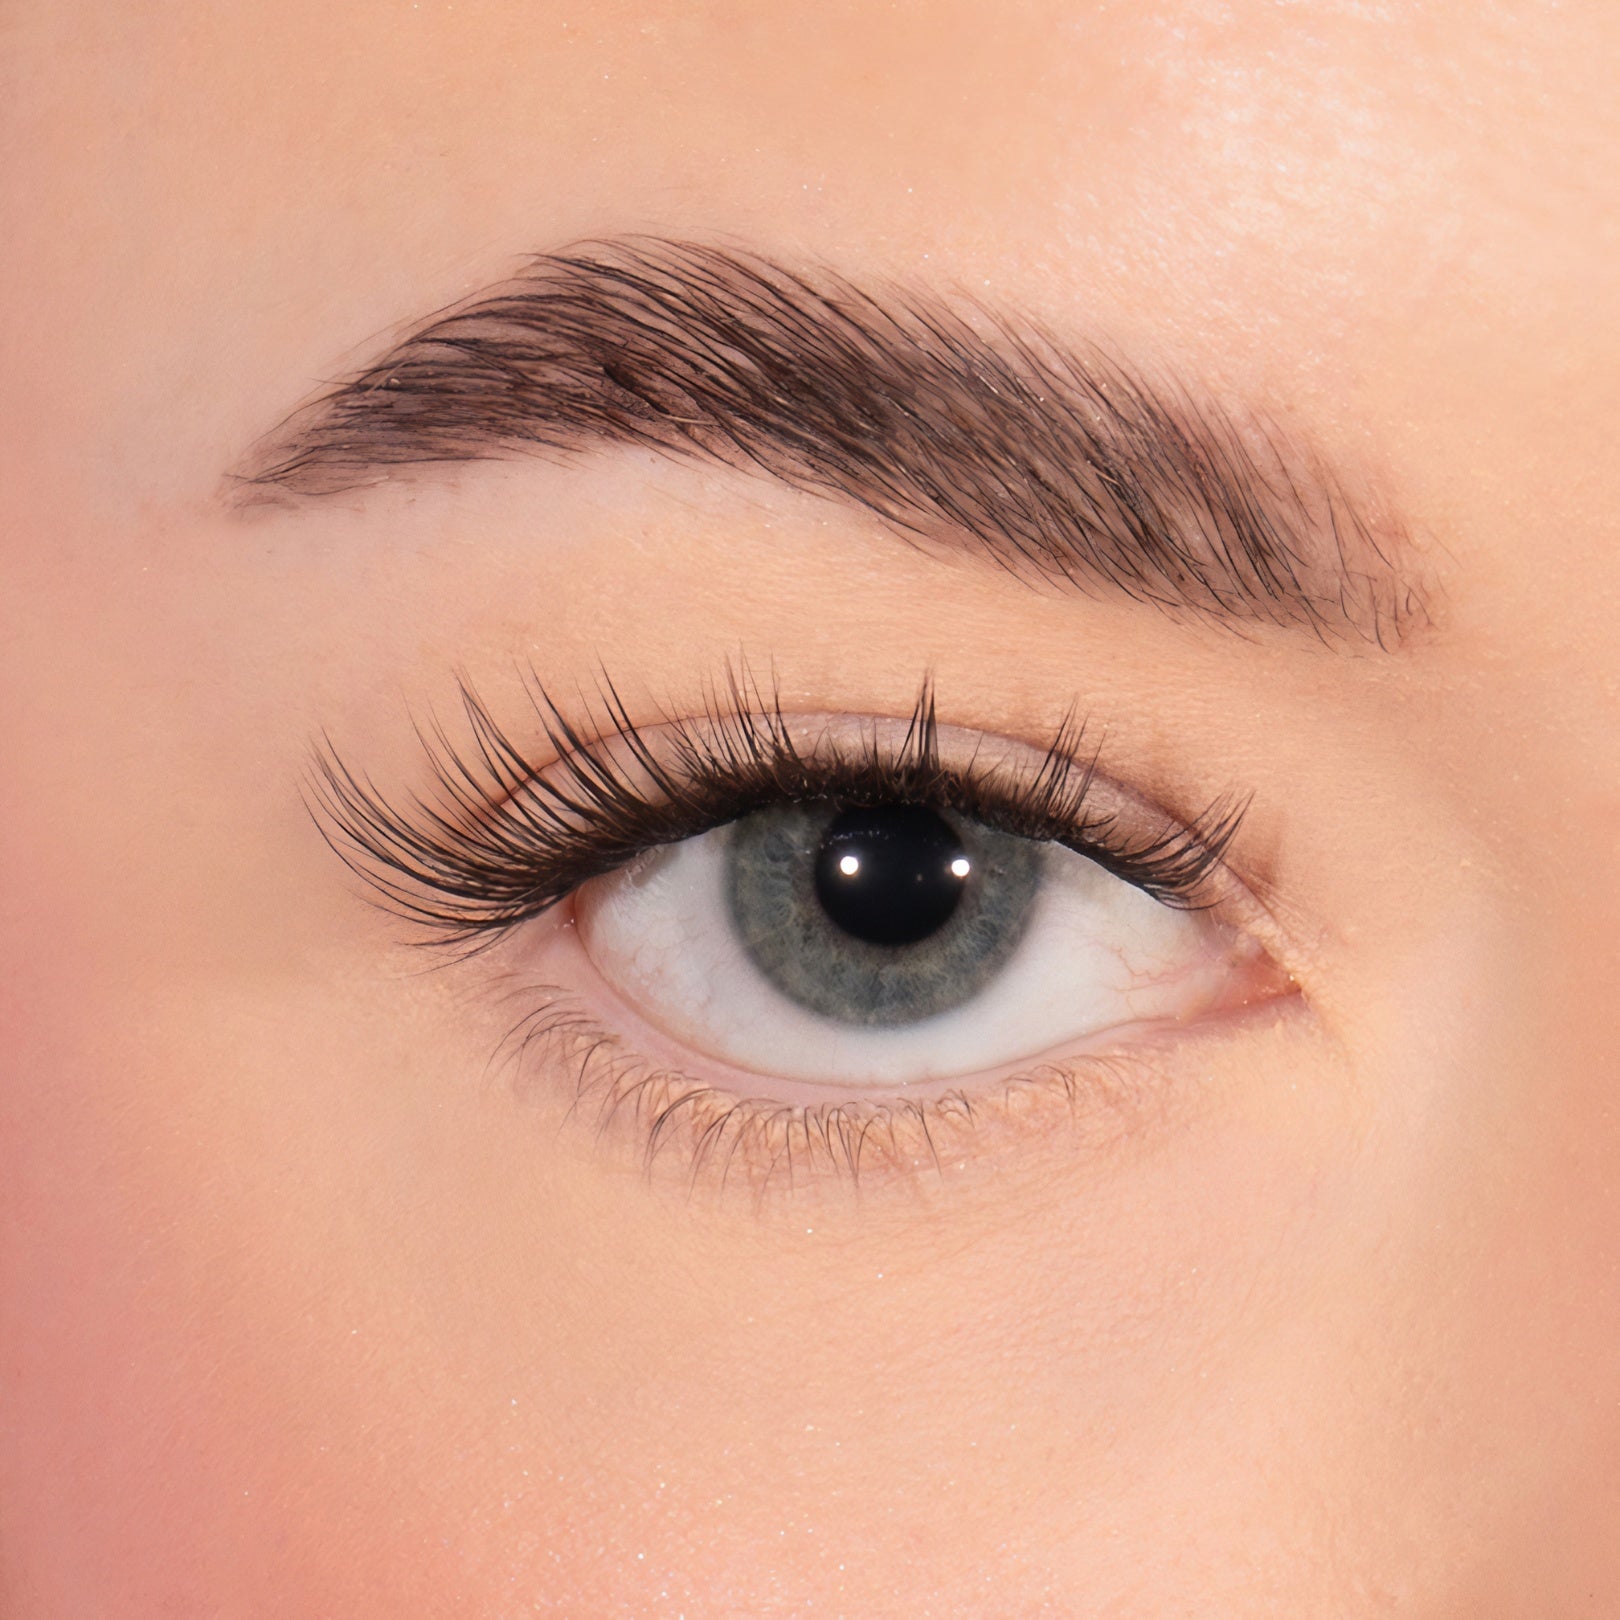 Tapered Press-On Lashes